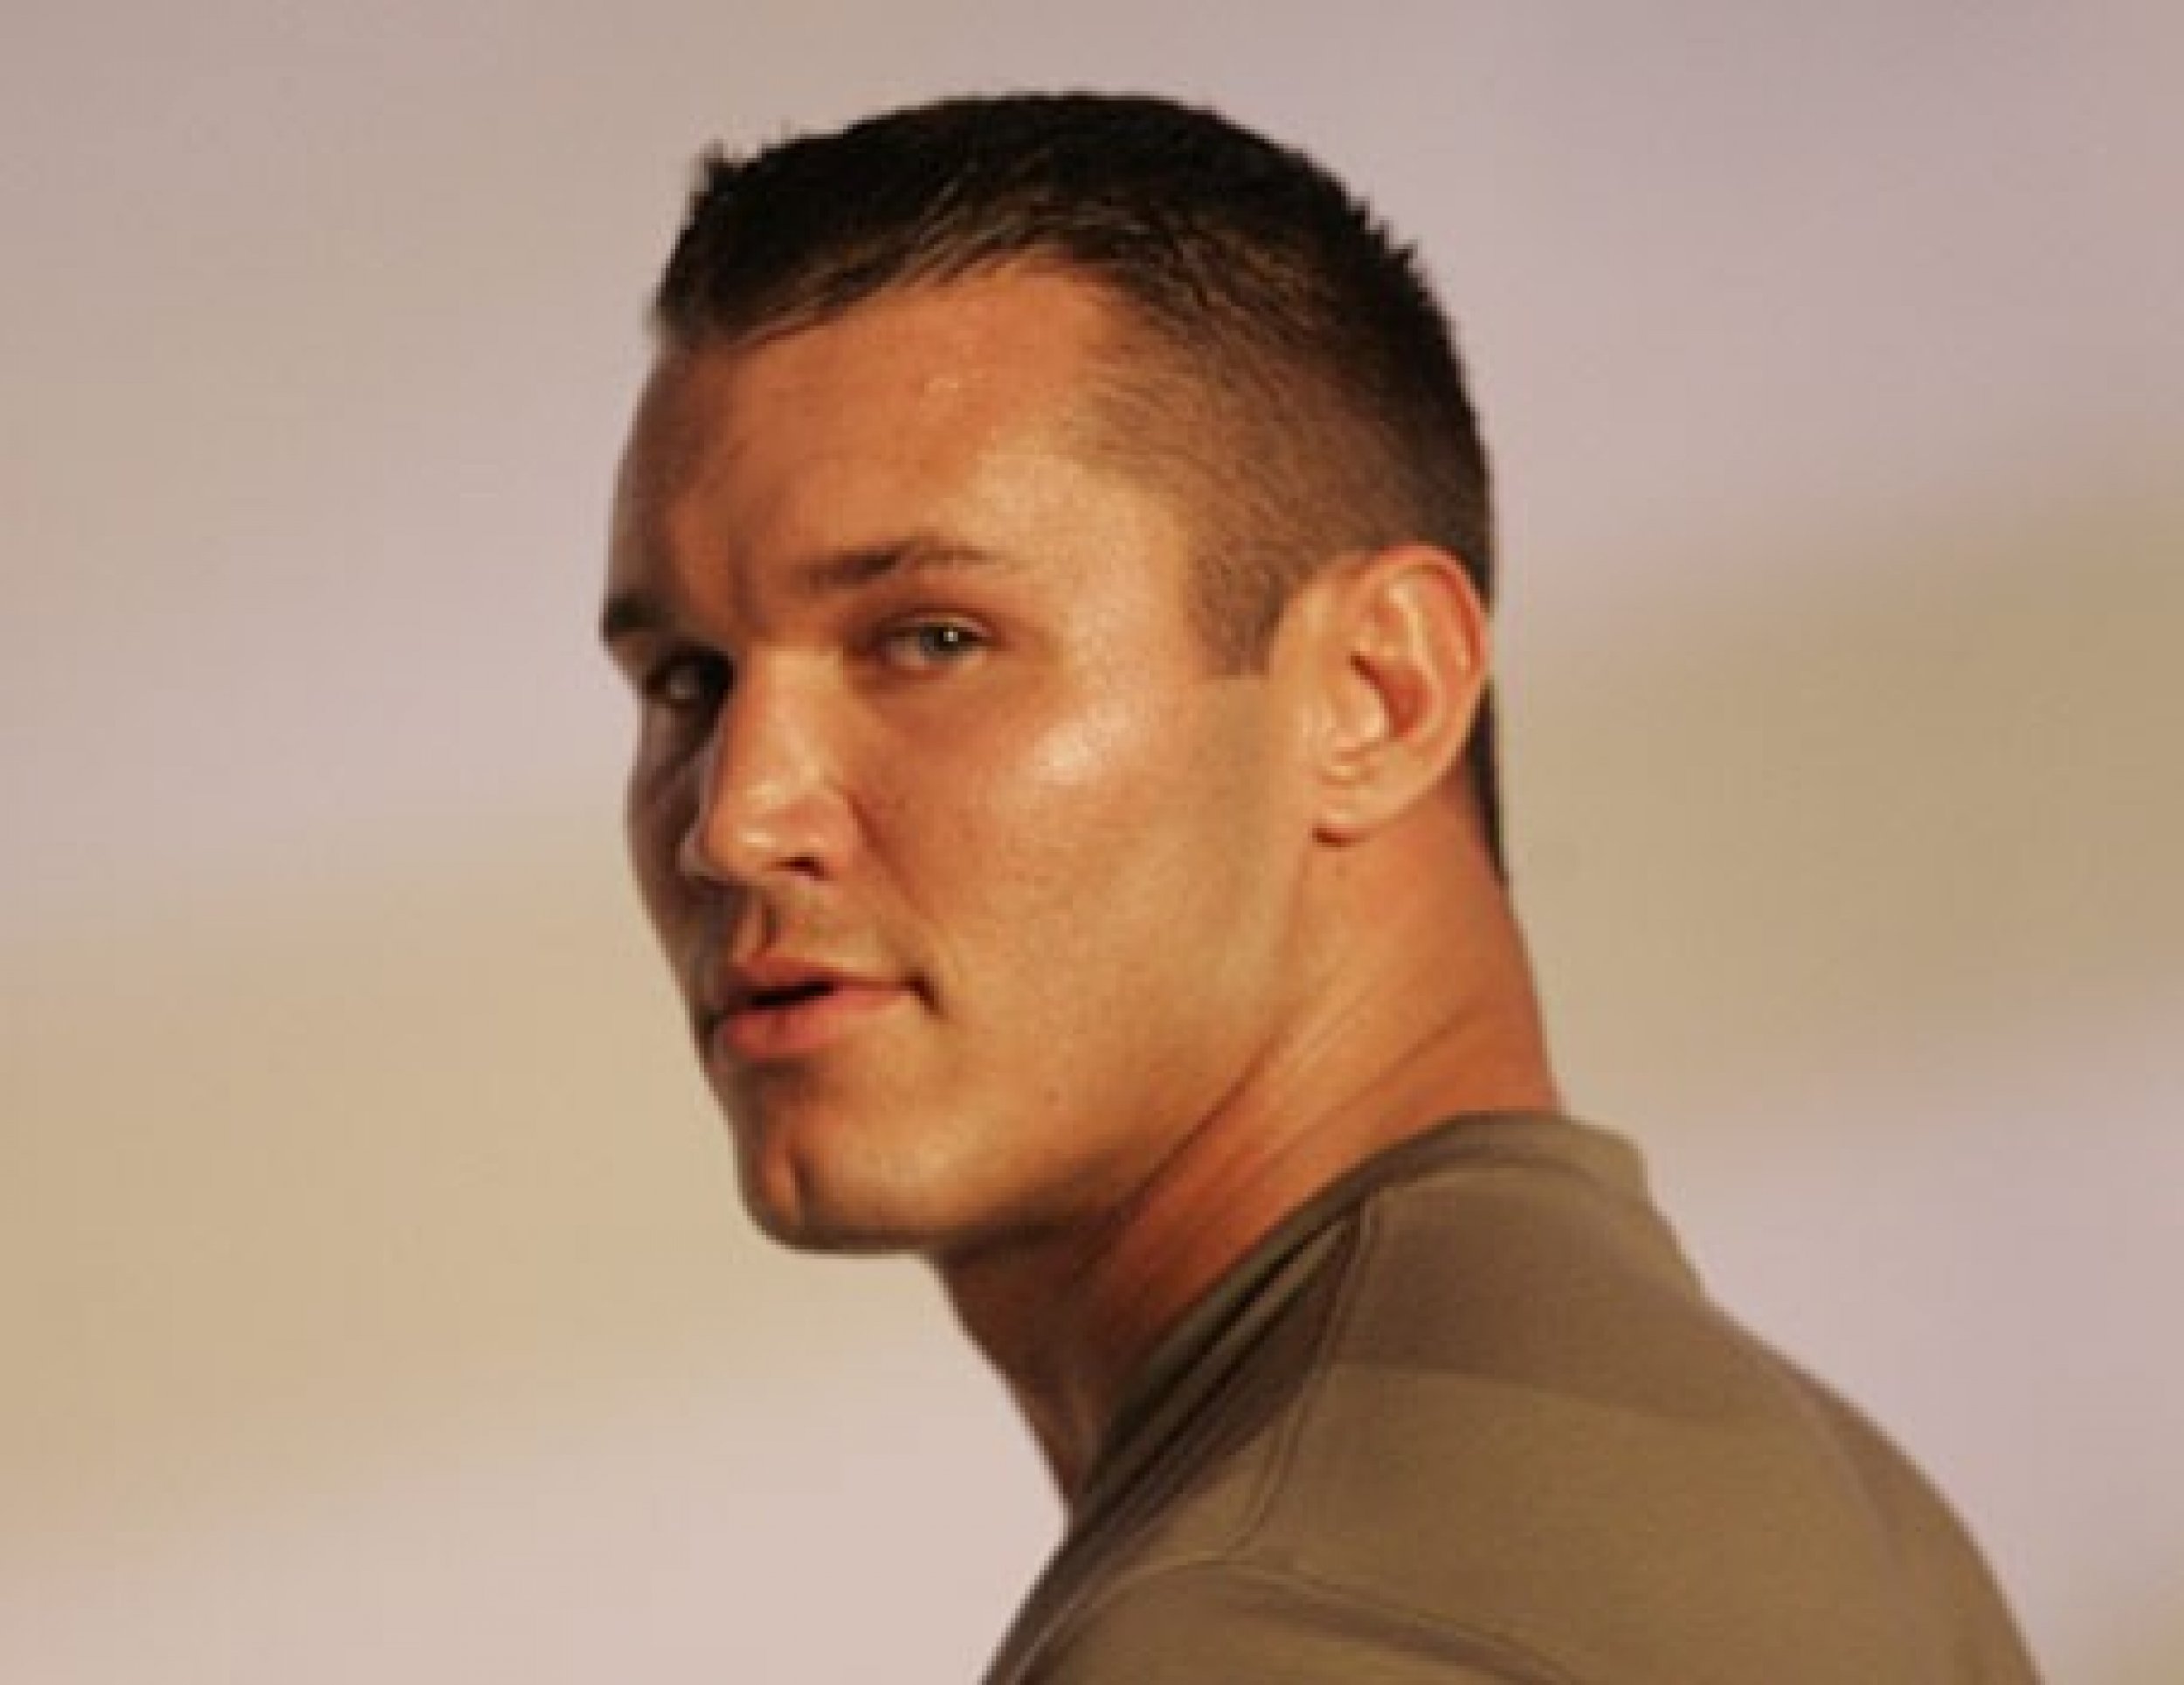 Photo: 005 3 | Randy Orton and Victoria - October 27, 2004 album |  Christine J Coons | Fotki.com, photo and video sharing made easy.